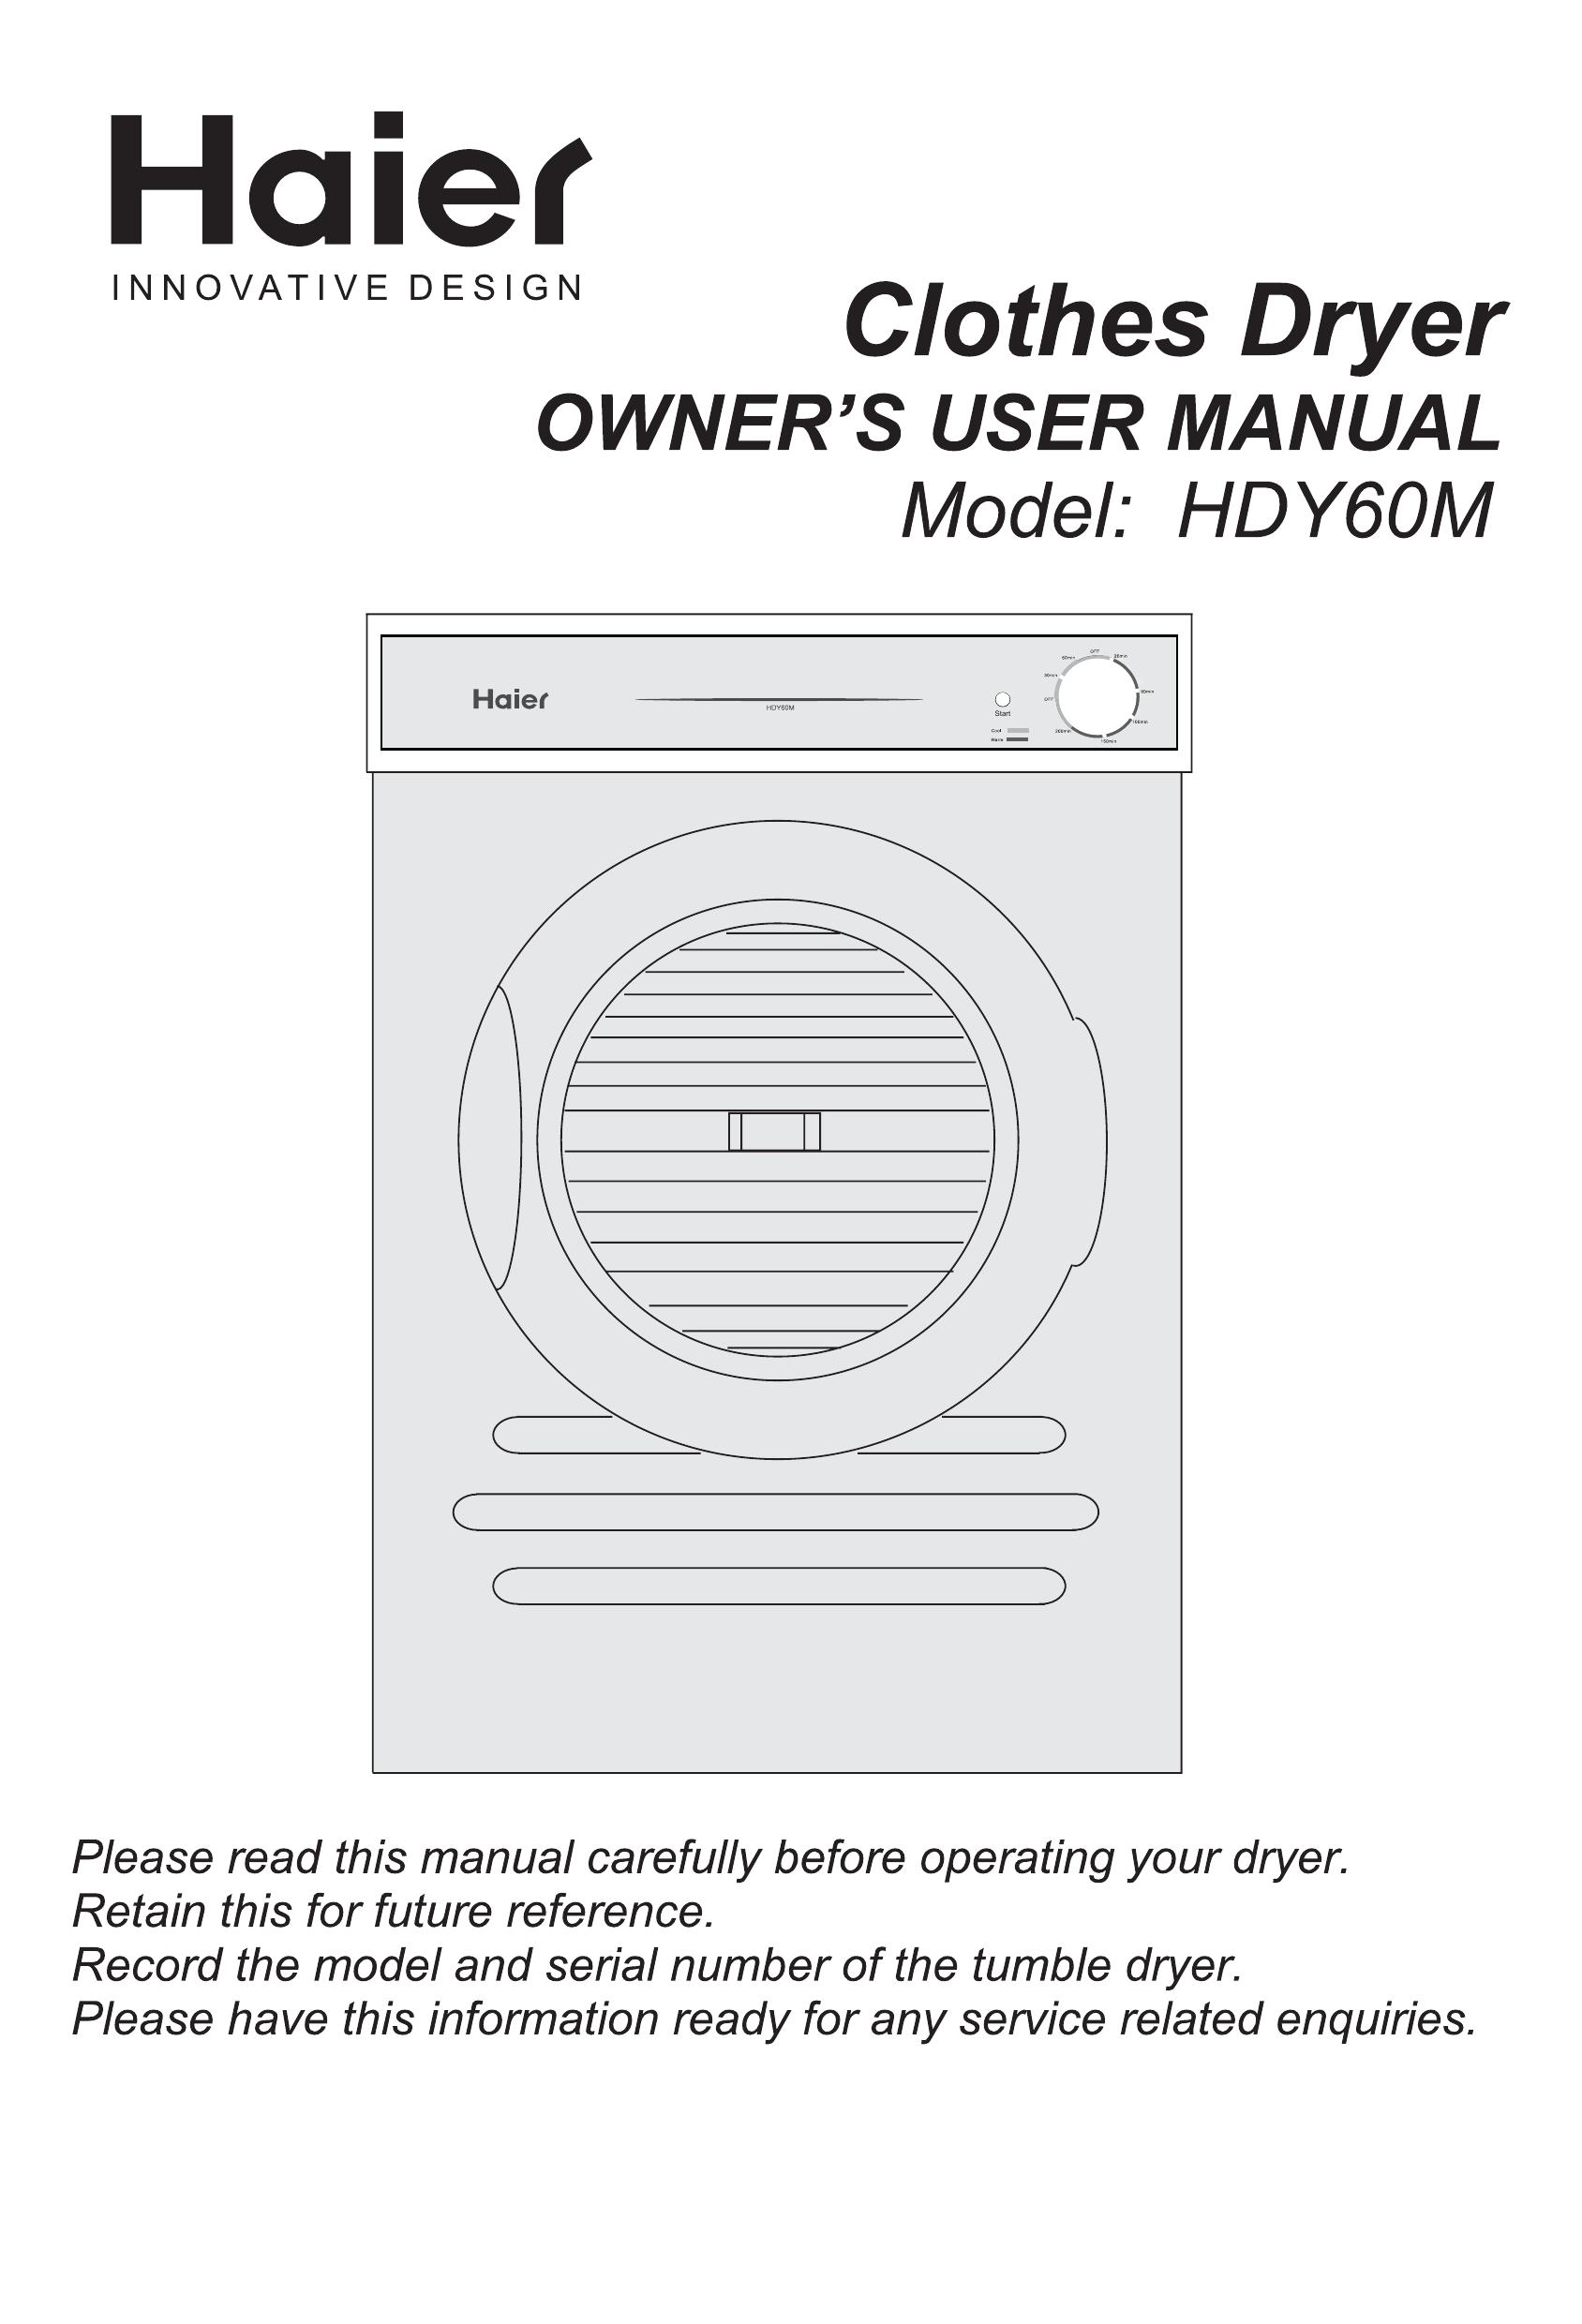 Haier HDY60M Clothes Dryer User Manual